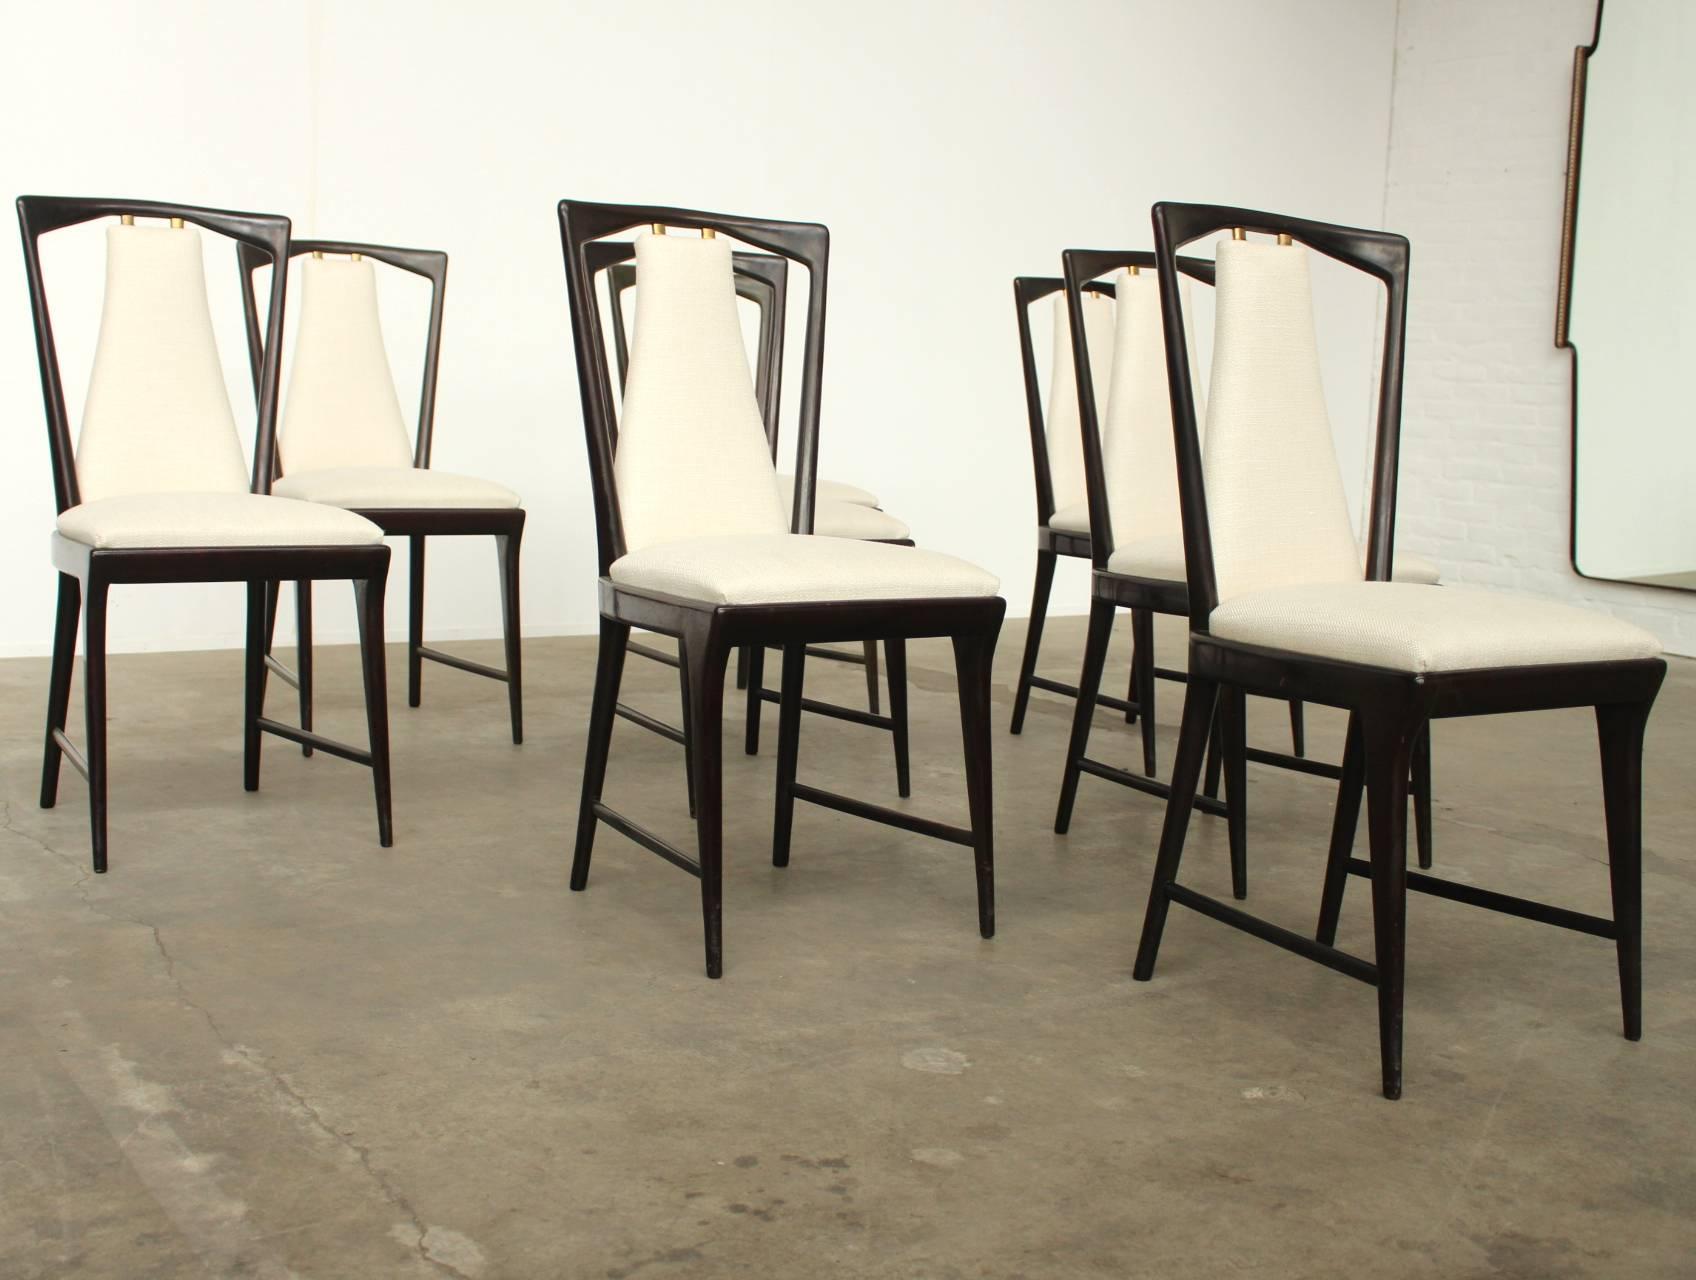 Wonderful set of eight very elegant, newly upholstered unused mahogany dining chairs with copper details. The new foam and fabric is of superior quality, the upholstery has a subtle small fish bone pattern and shiny silk-like threads woven through